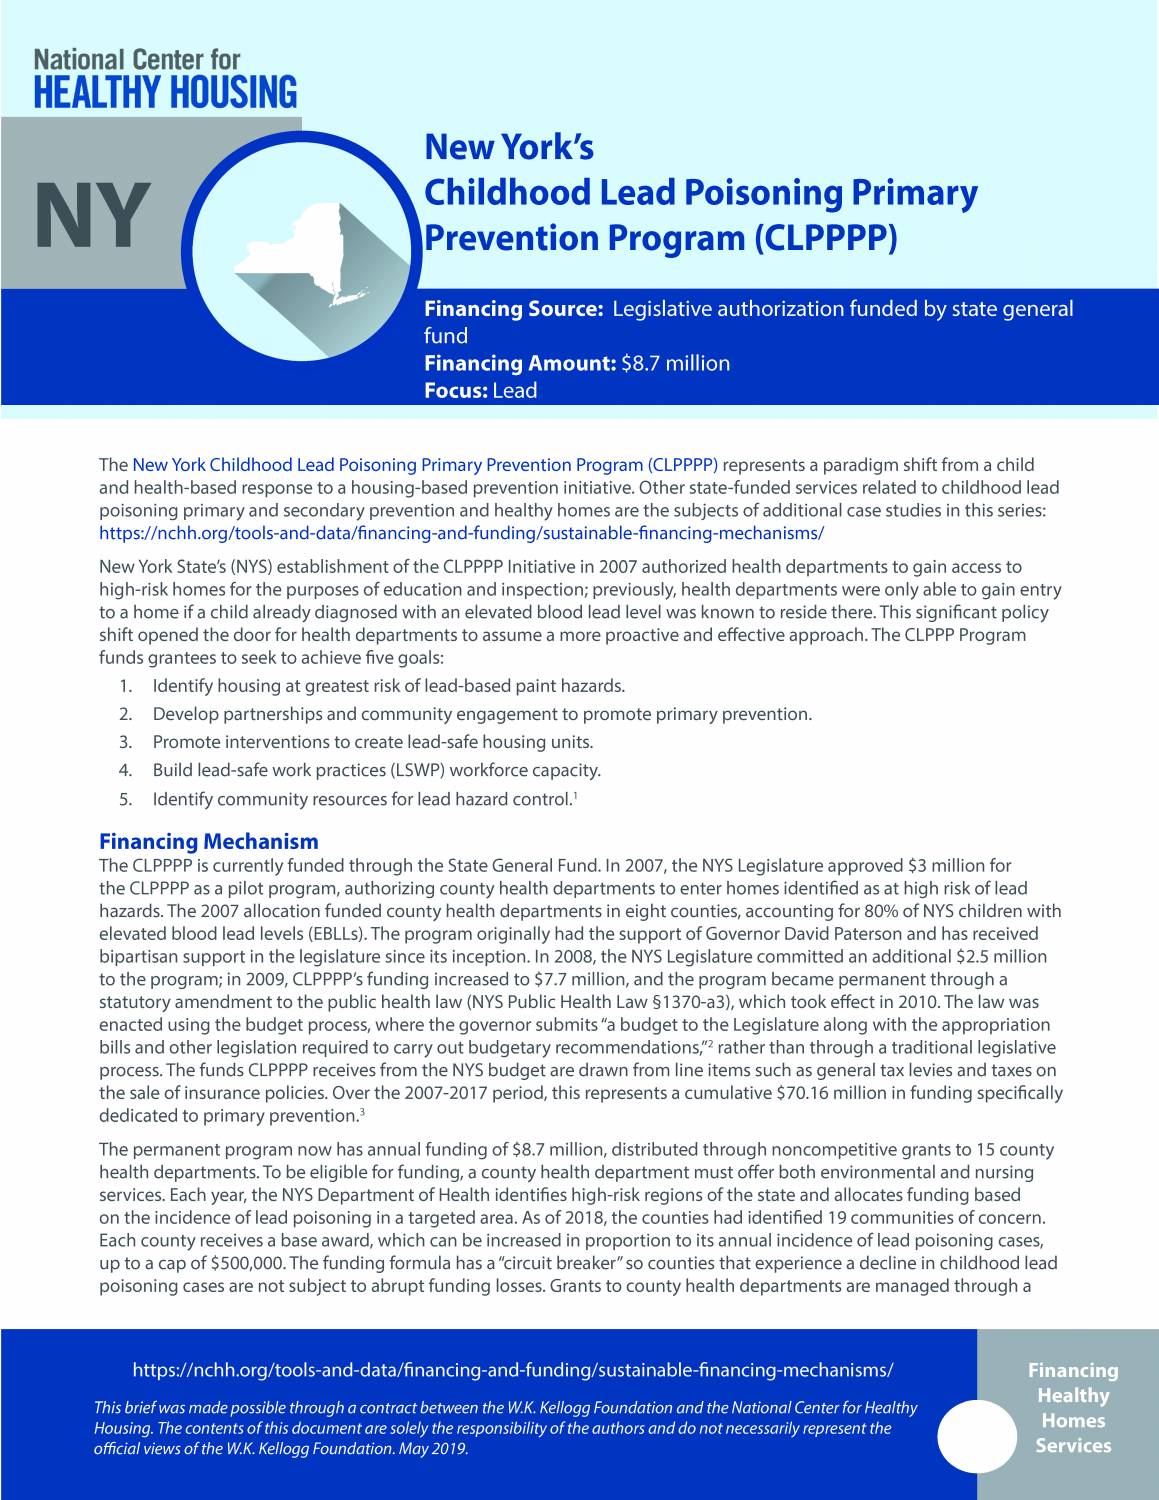 Sustainable Financing Mechanisms: New York's Childhood Lead Poisoning Primary Prevention Program